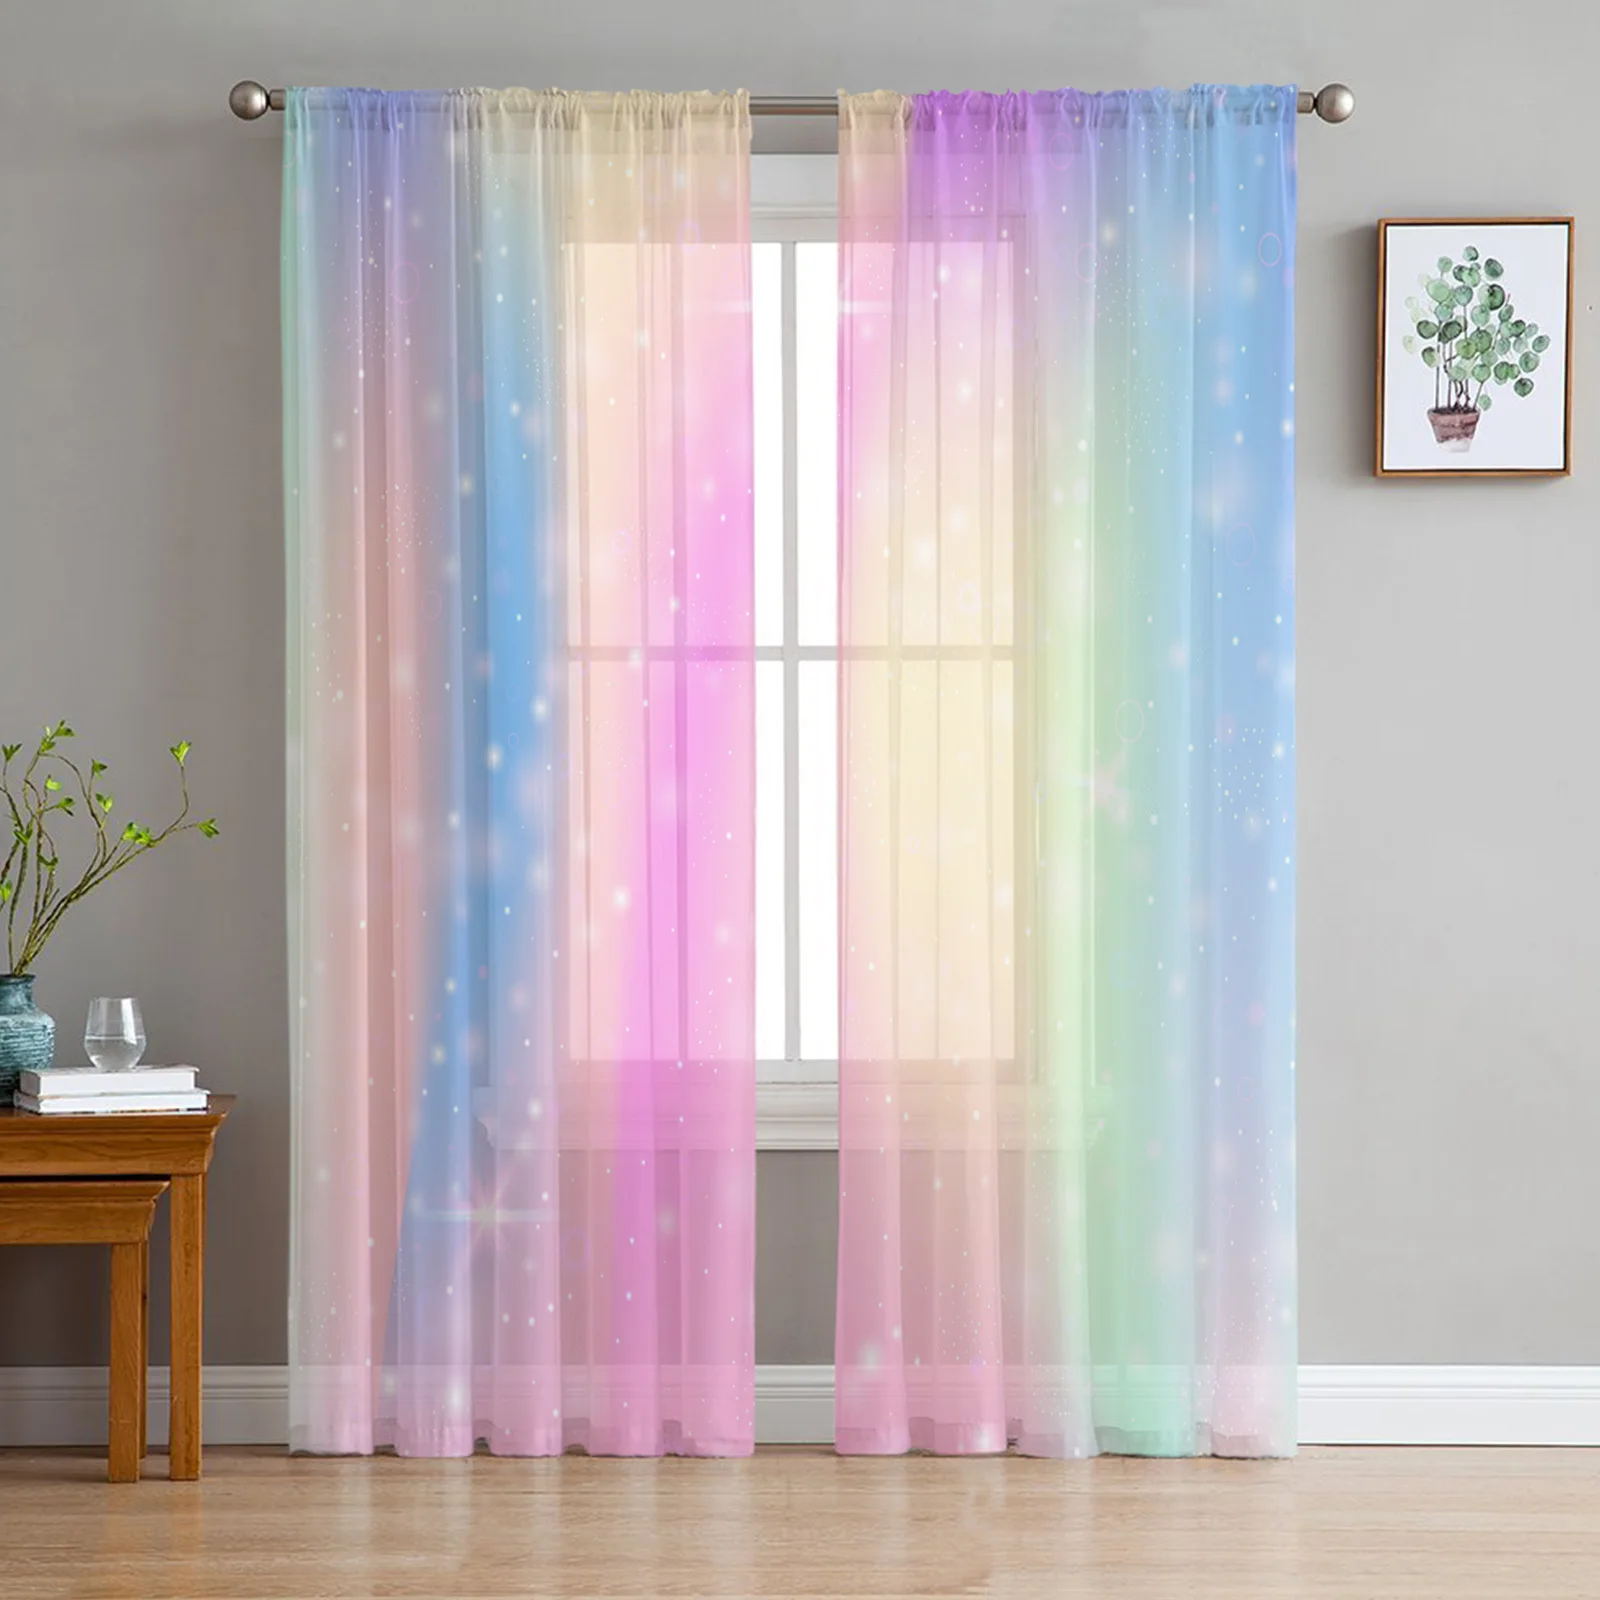 Rainbow Pink Morning Glow Window Treatment Tulle Modern Sheer Curtains for Kitchen Living Room the Bedroom Curtains Decoration 